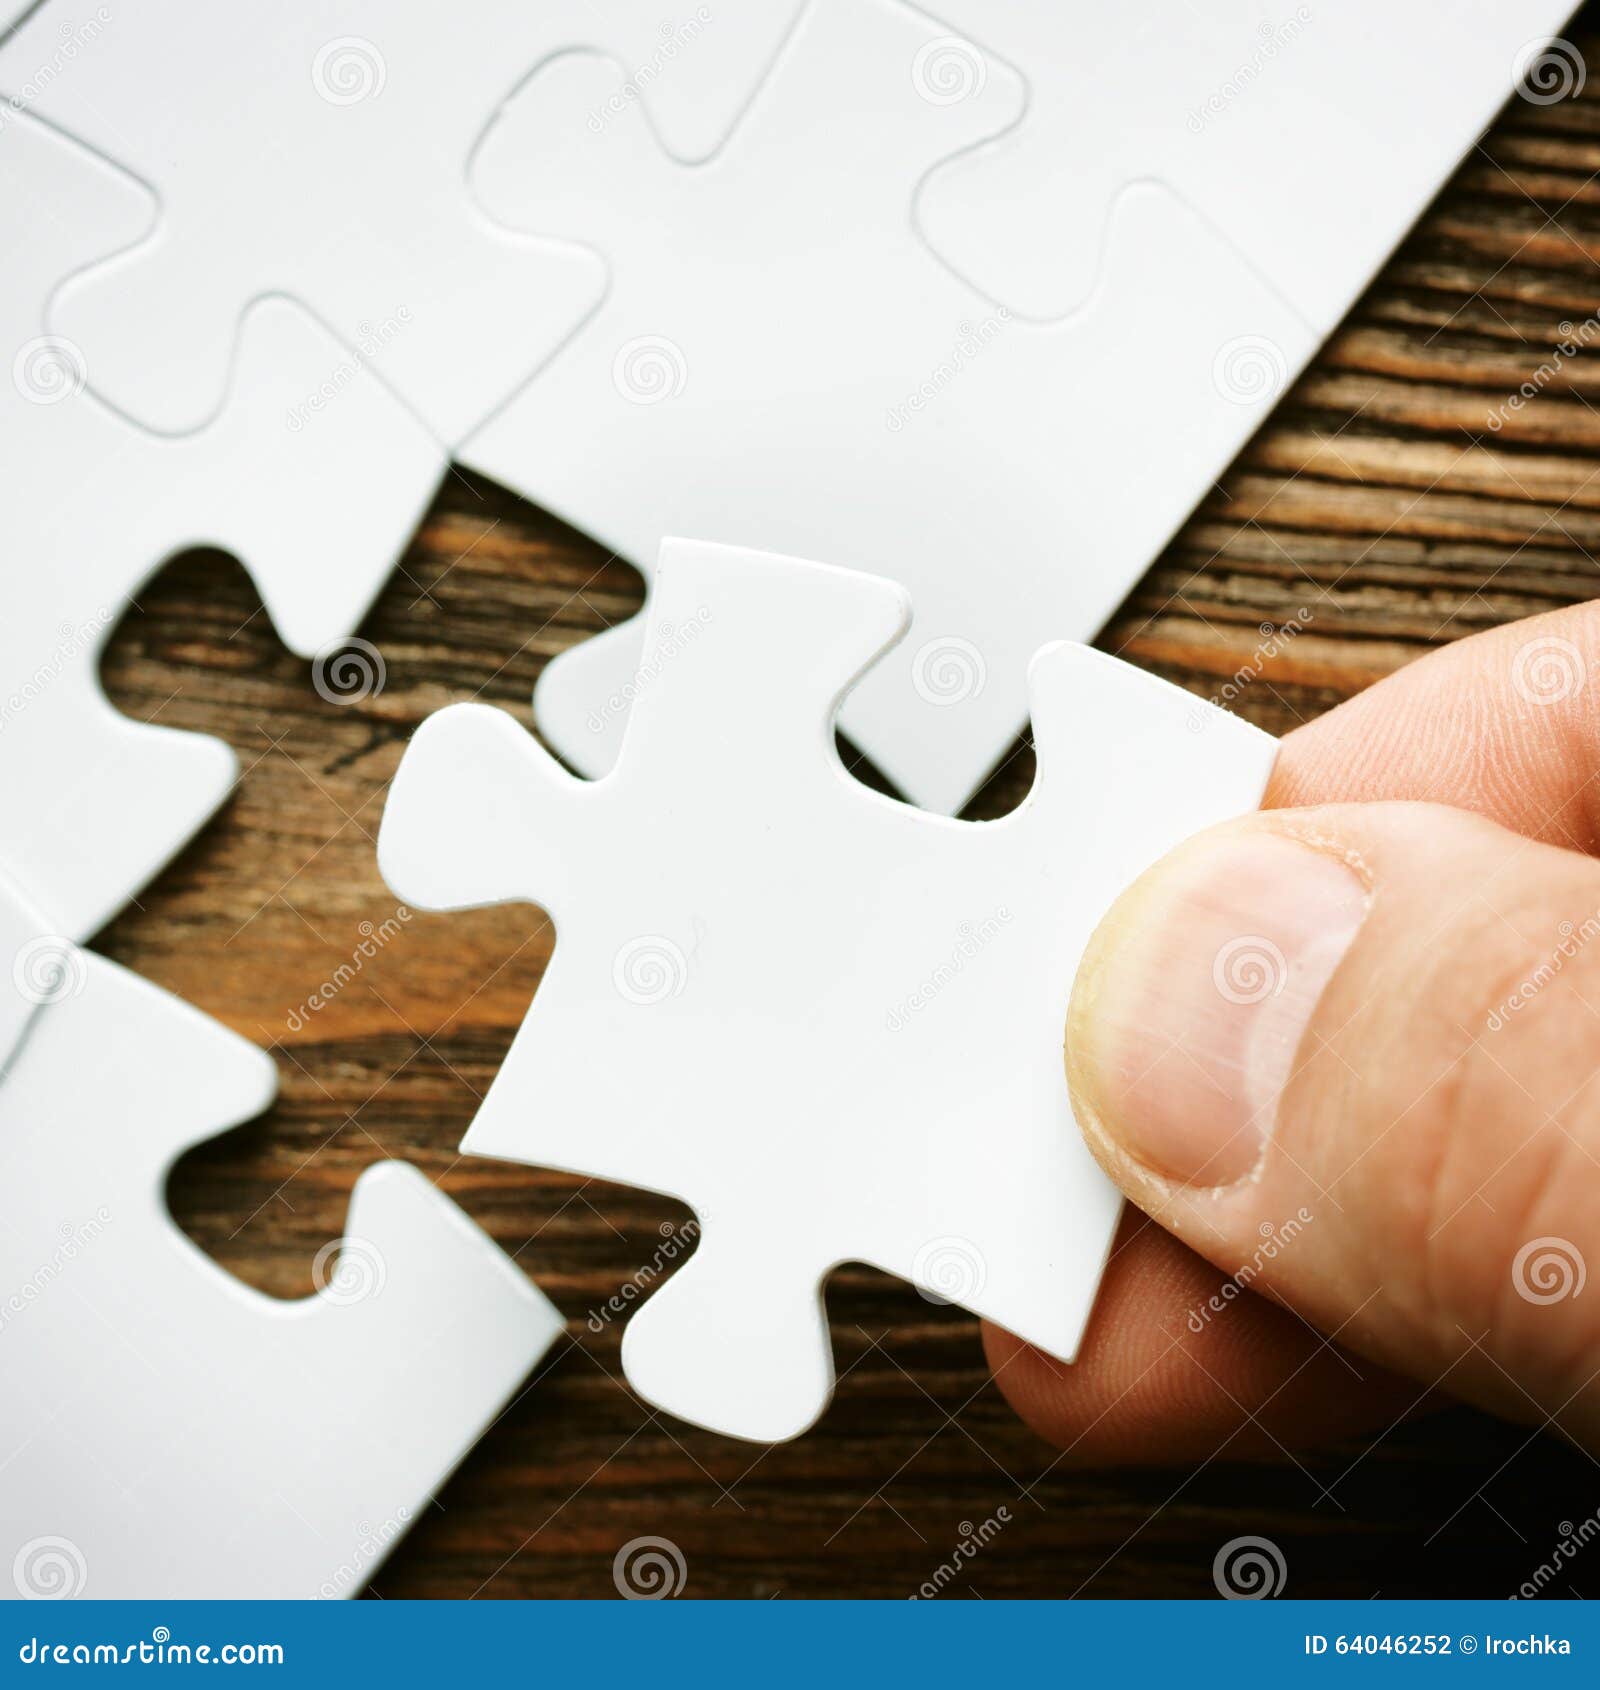 hand with missing jigsaw puzzle piece. business concept image for completing the final puzzle piece.